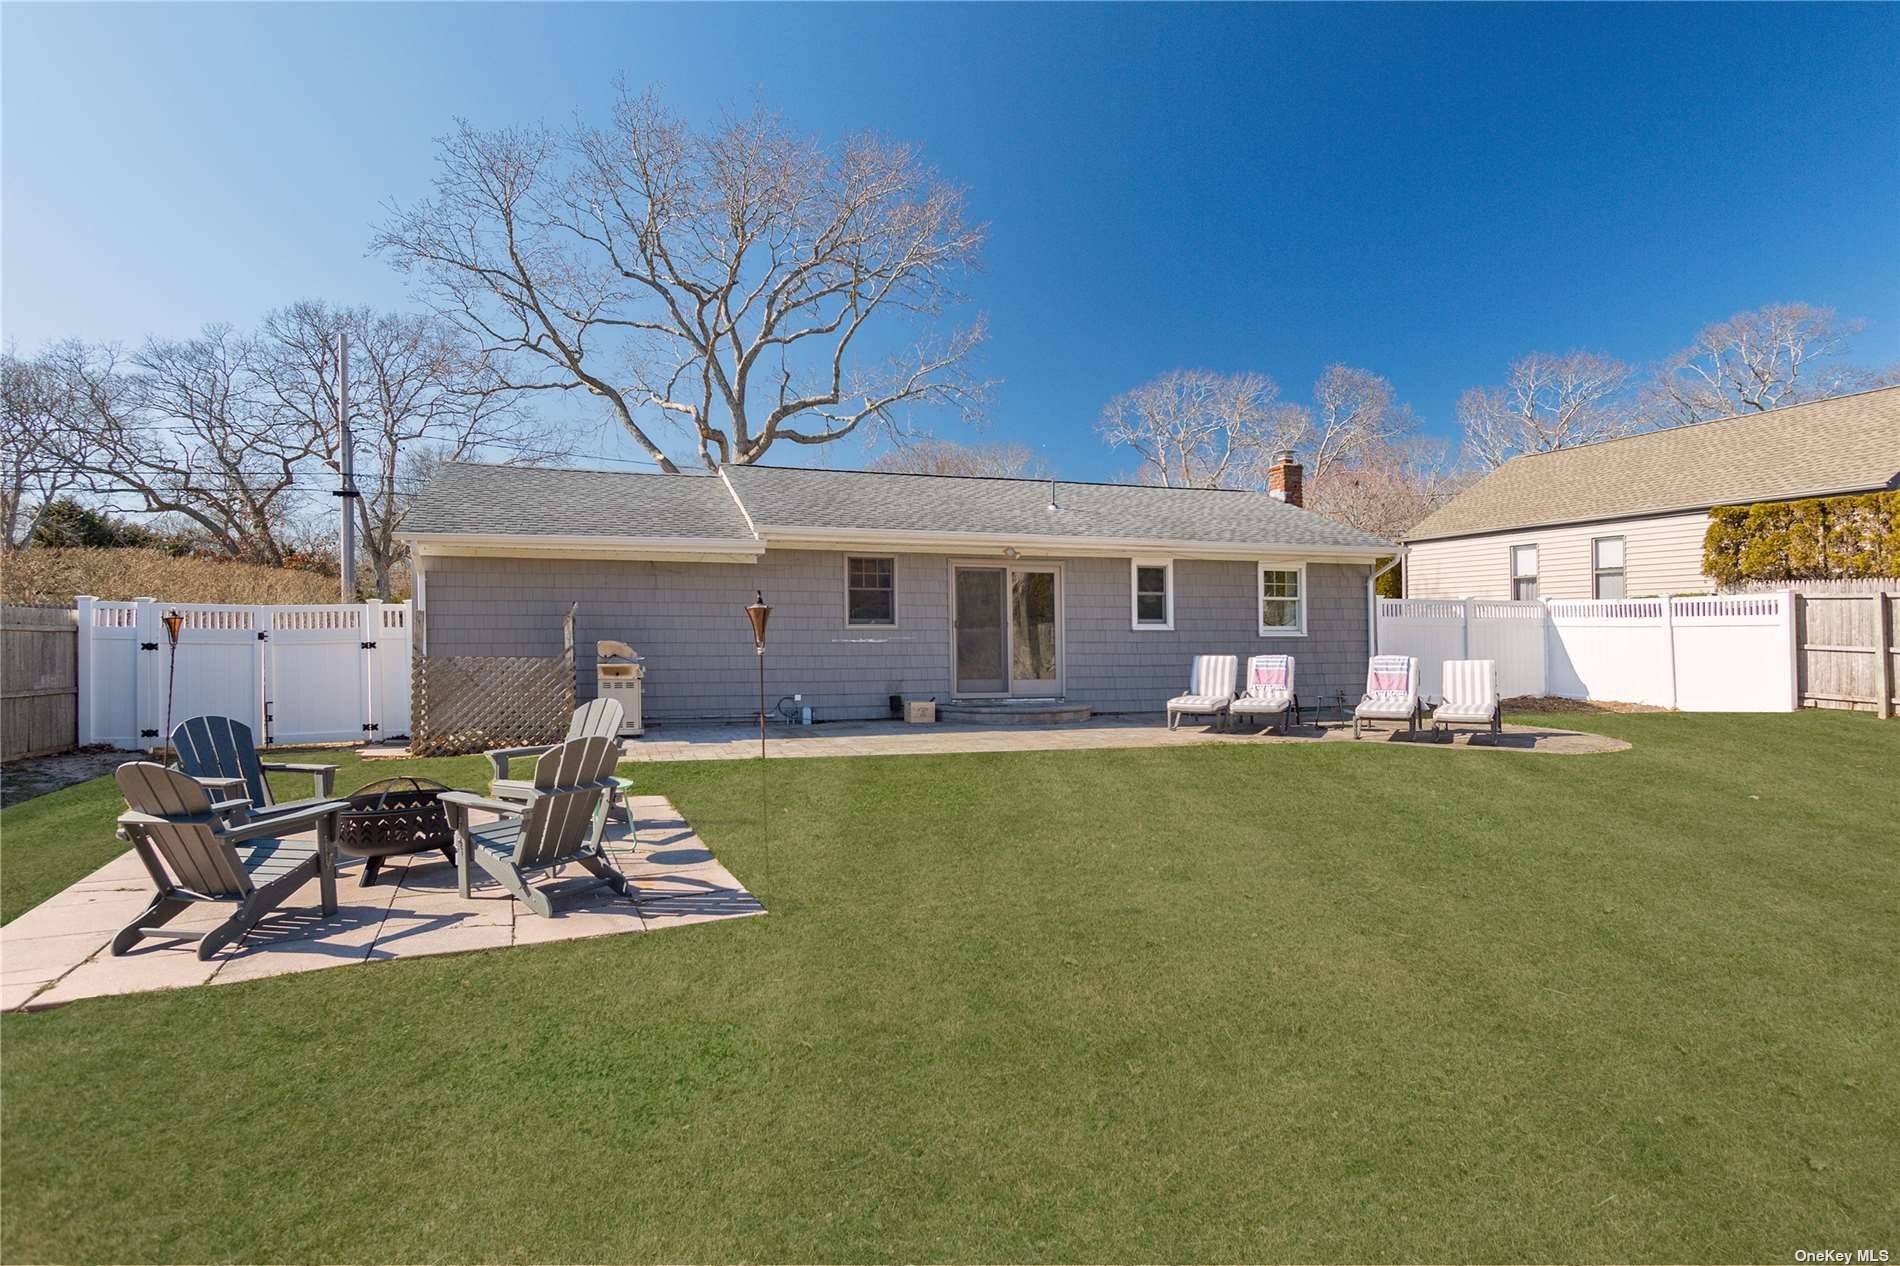 This charming 2 bedroom 1 bath beach house awaits your summer fun with close proximity to Ponquogue Bridge and Hampton Bays waterside restaurants.